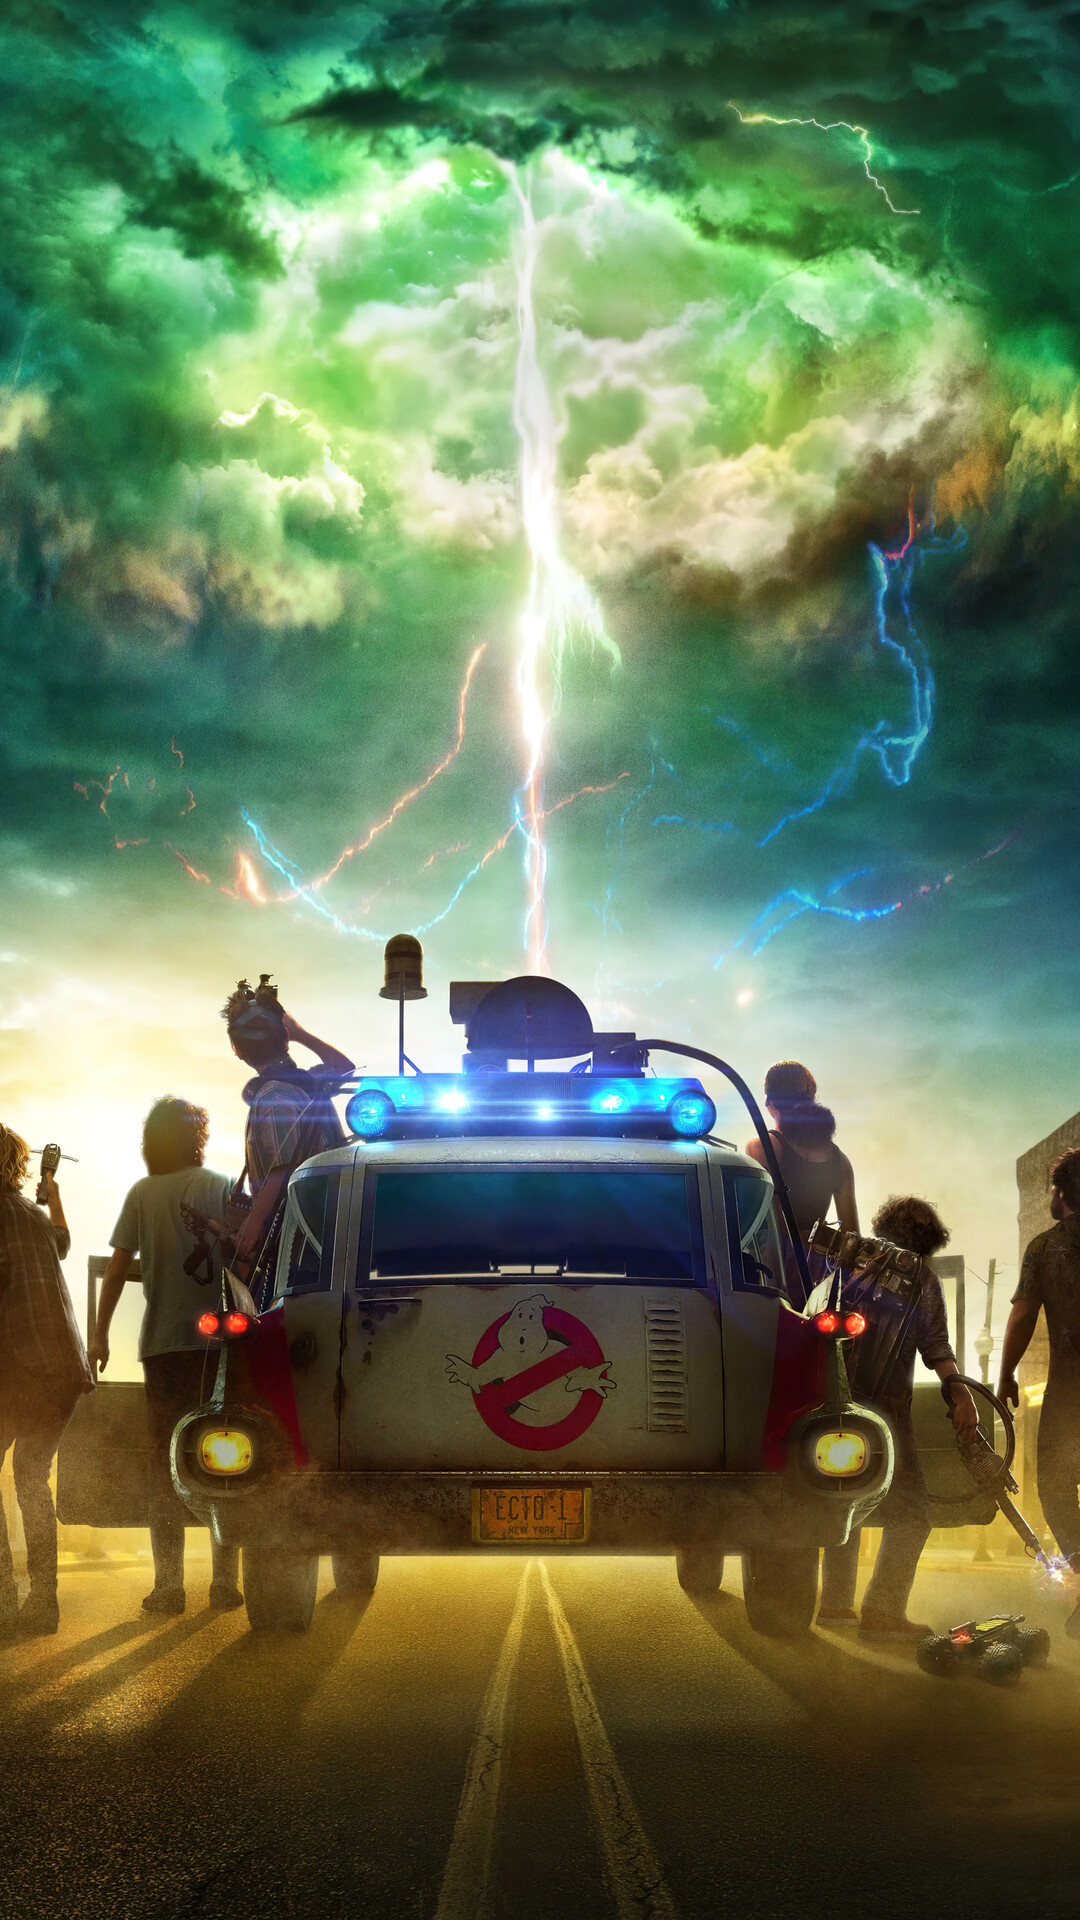 Ghostbusters: Afterlife, Poster, Ecto-1, Paranormal. 1080x1920 Full HD Wallpaper.